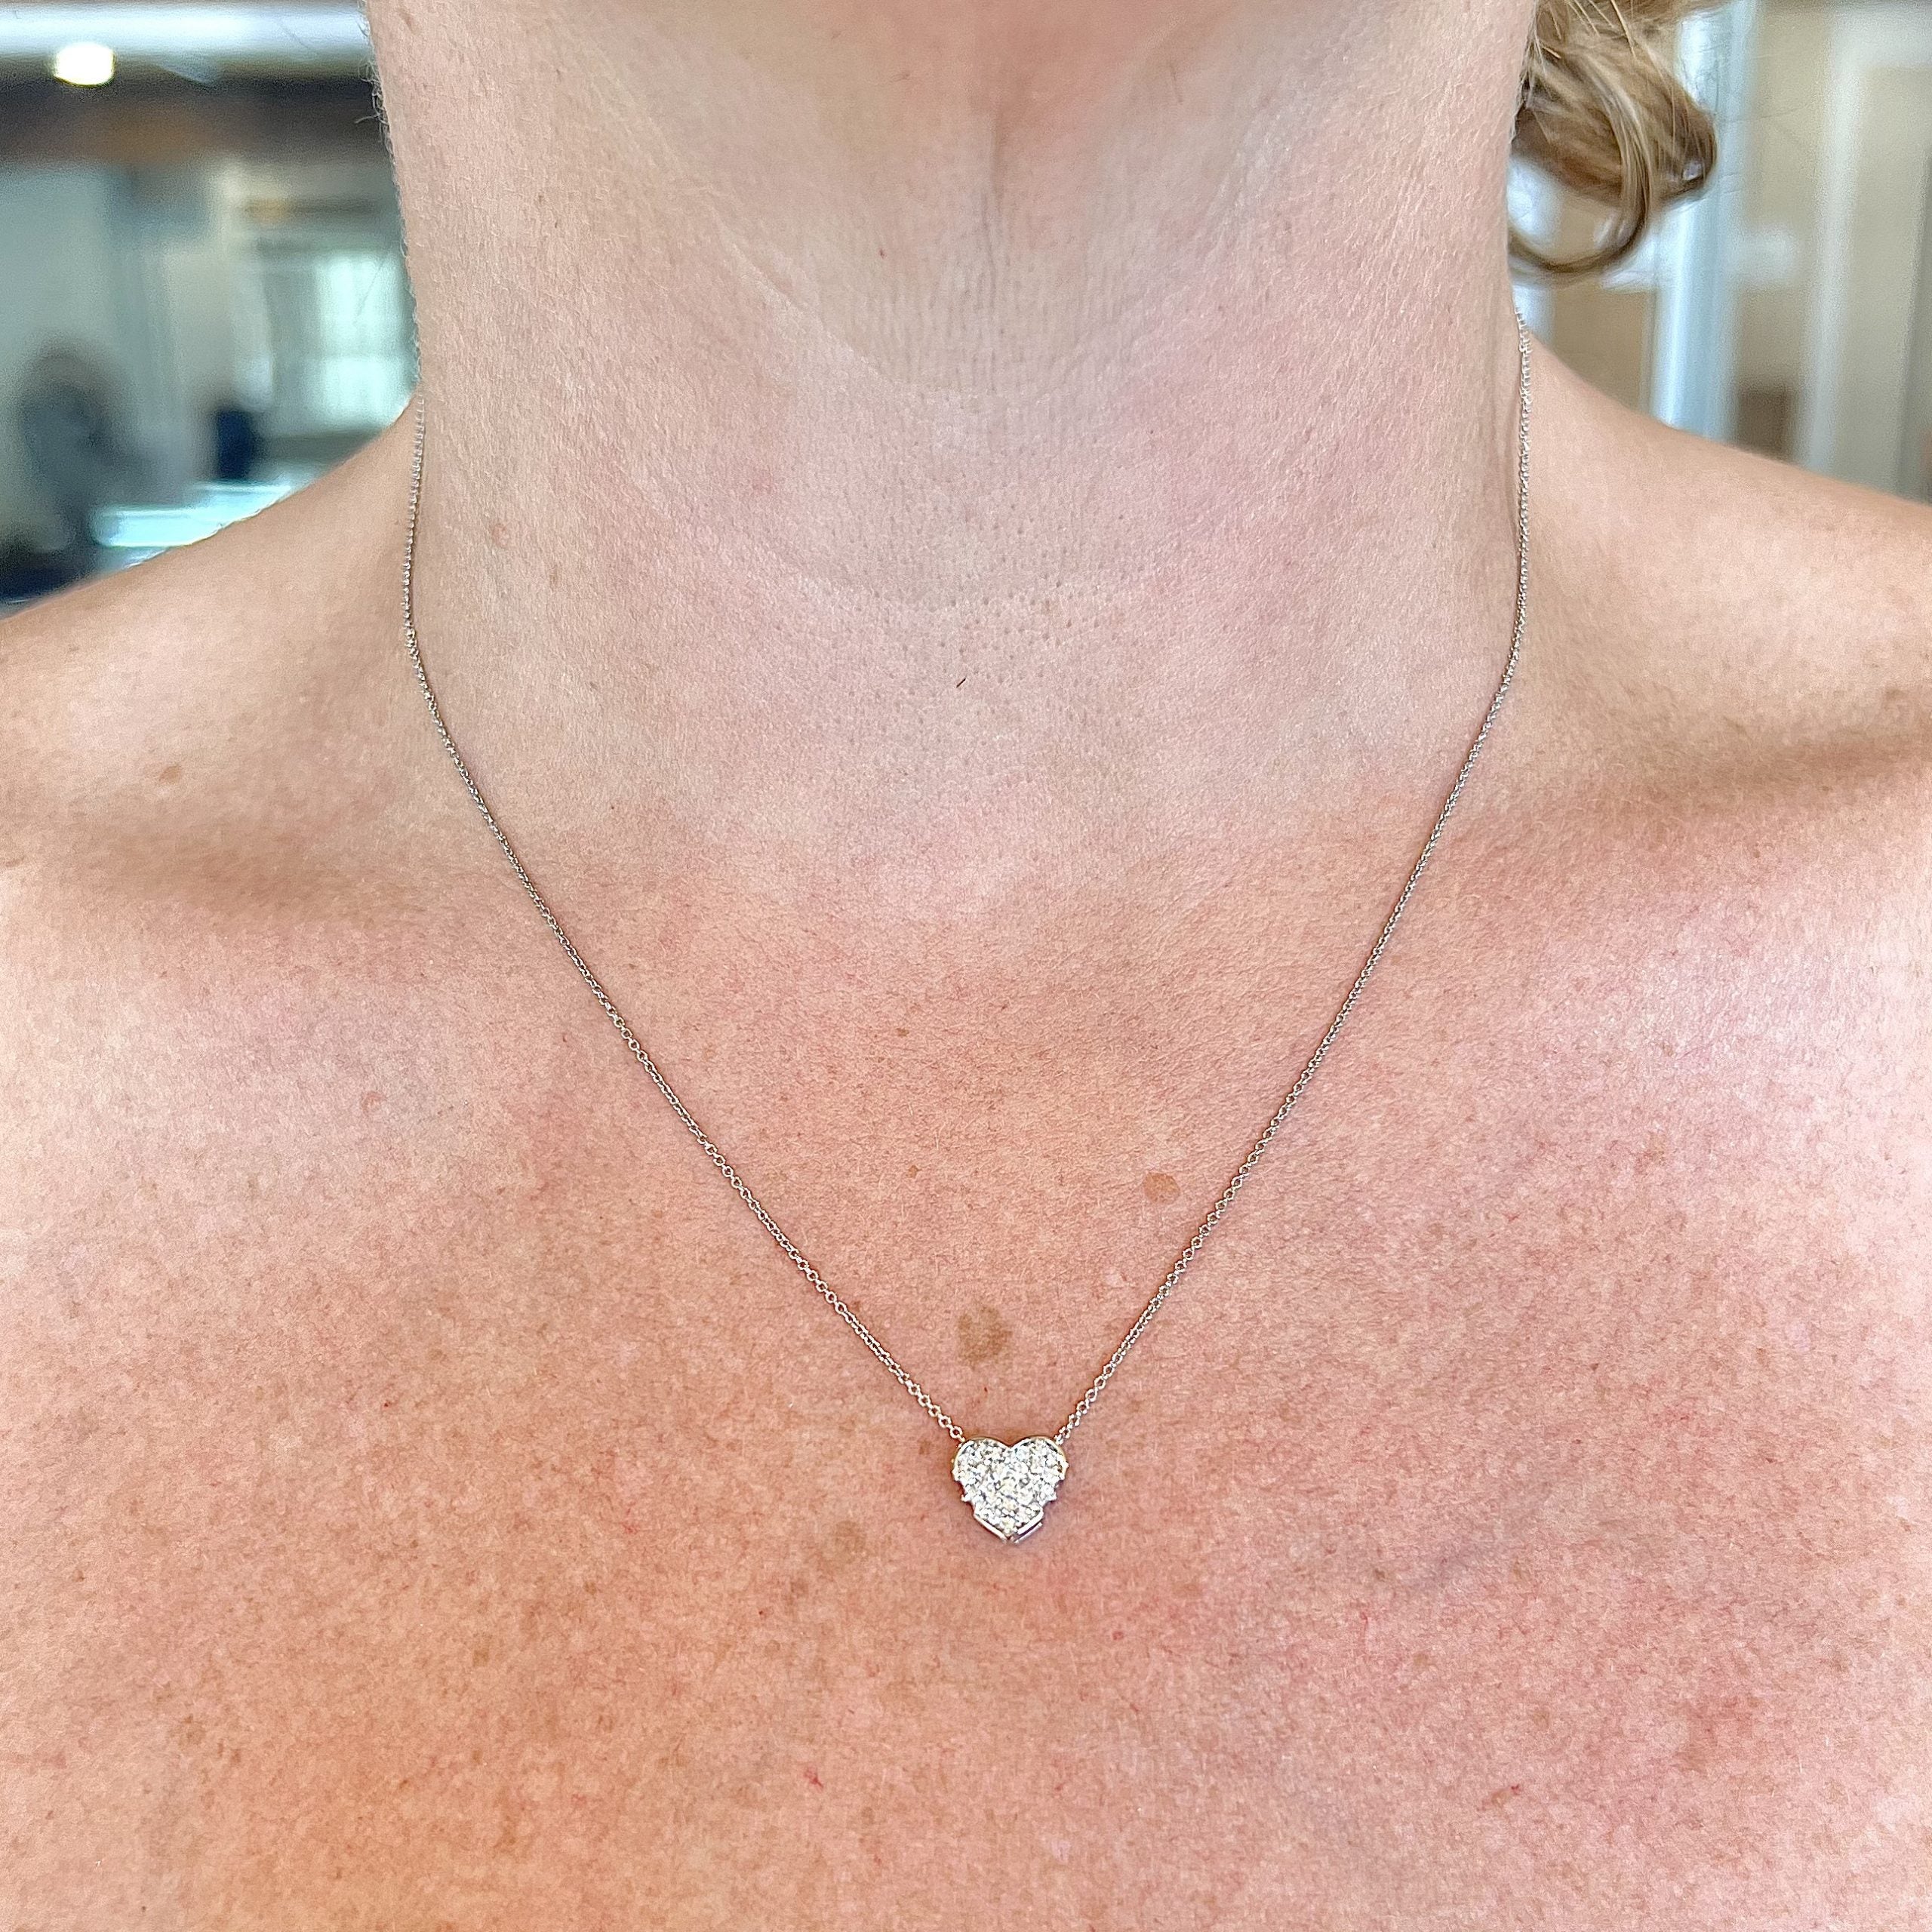 Baby Heart Necklace in 14K Gold - Michelle Chang